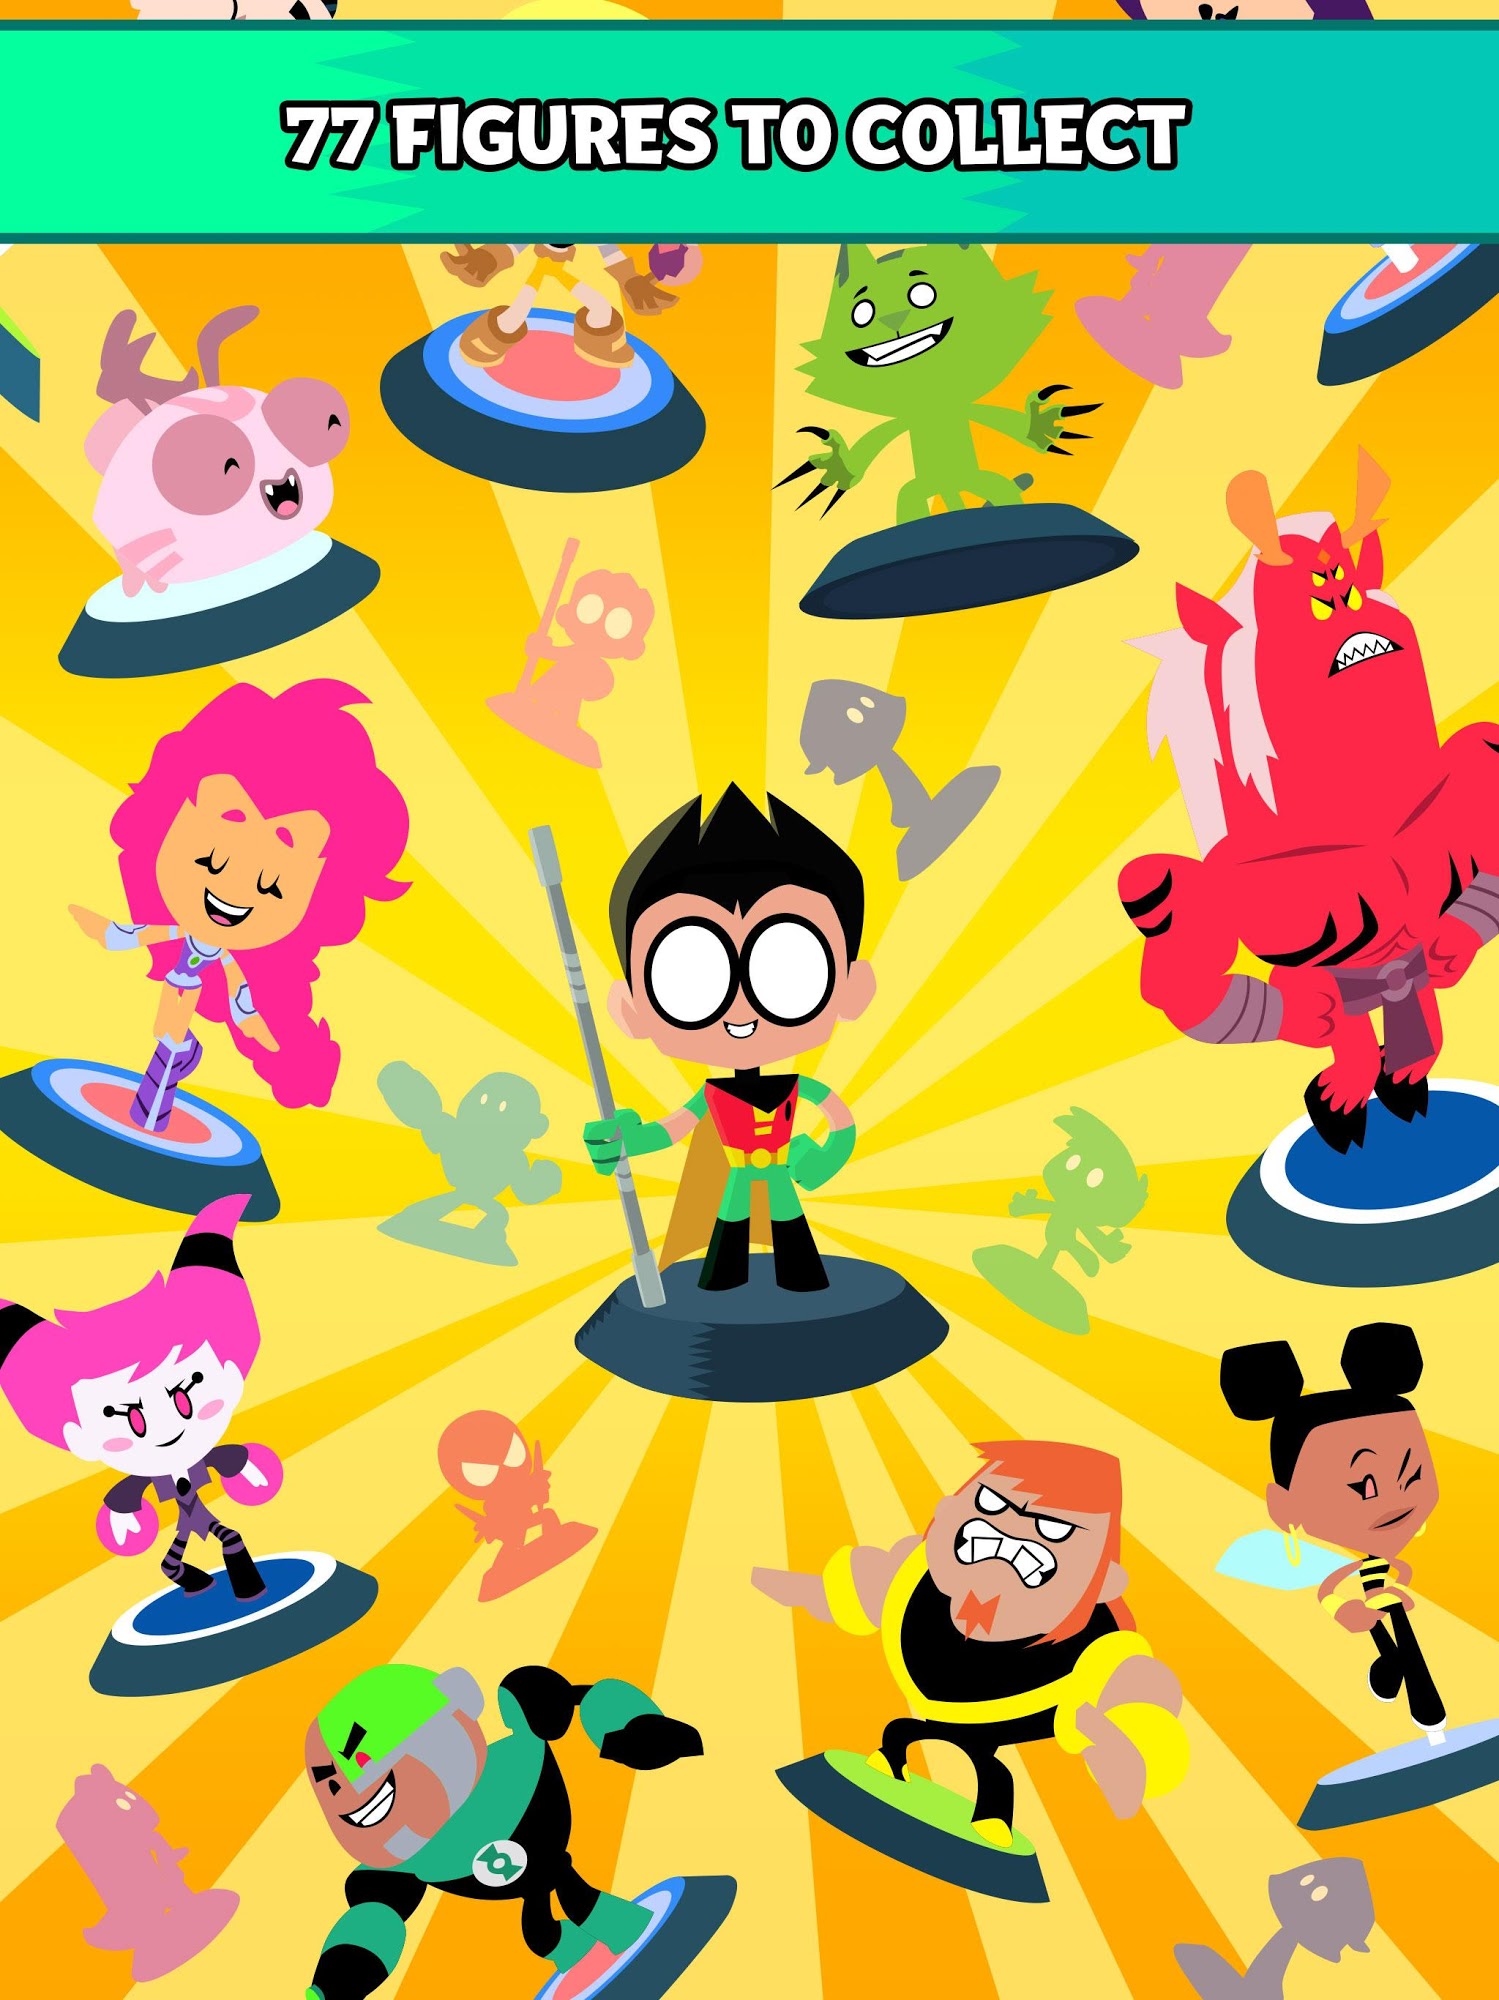 🔥 Download Teeny Titans Collect & Battle 2.9.9.1 [Patched] APK MOD.  Exciting arcade game for children with your favorite characters 